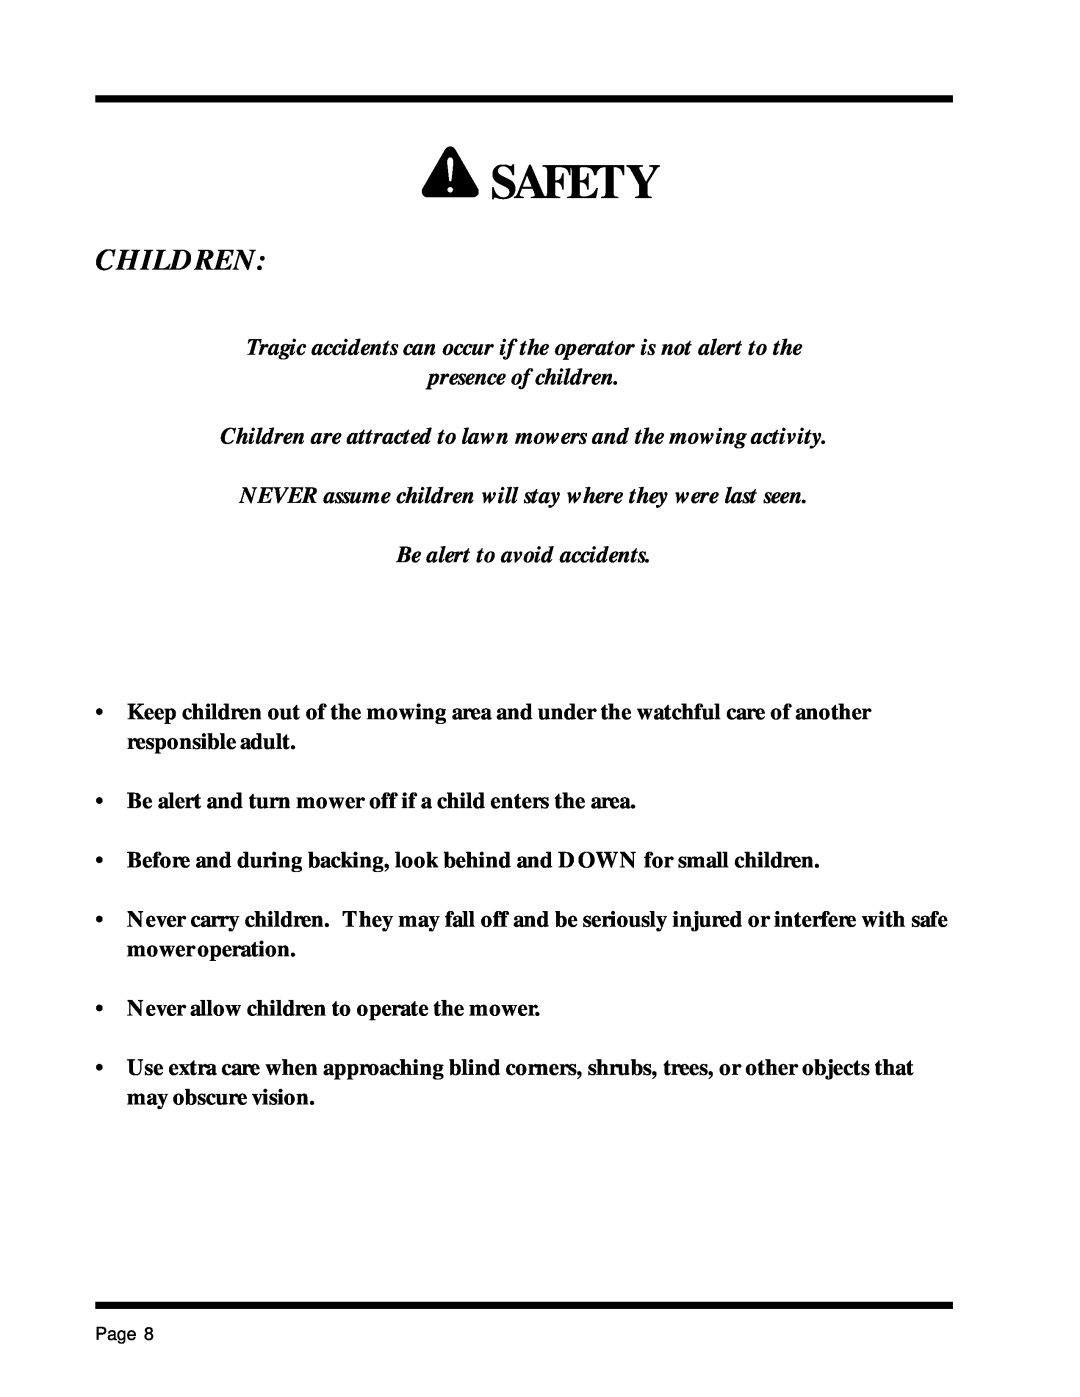 Dixon 13088-1100A Children, Tragic accidents can occur if the operator is not alert to the, presence of children, Safety 